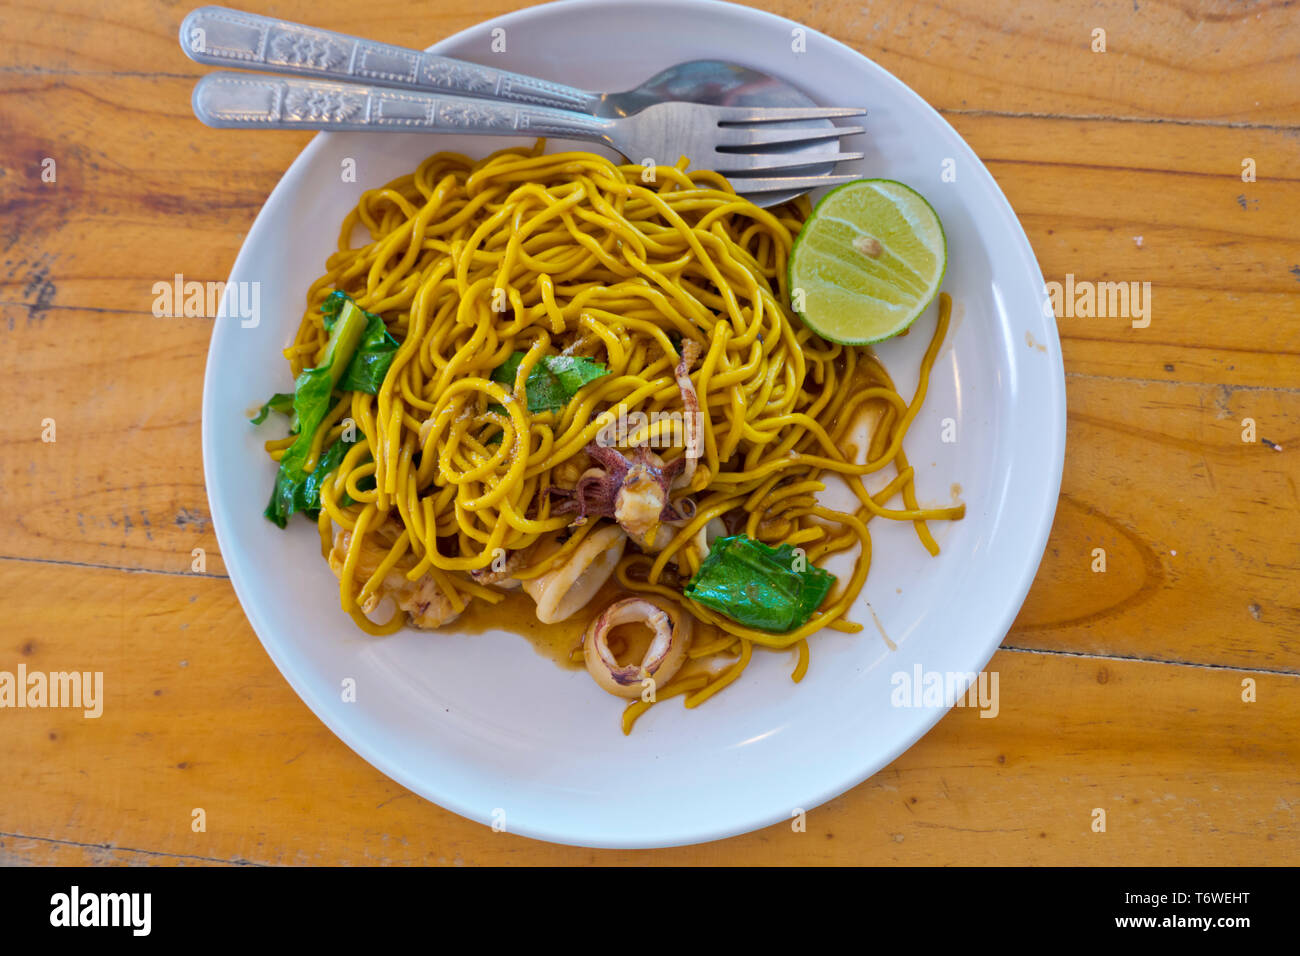 Noodles with fried seafood, Khao Lak, Thailand Stock Photo